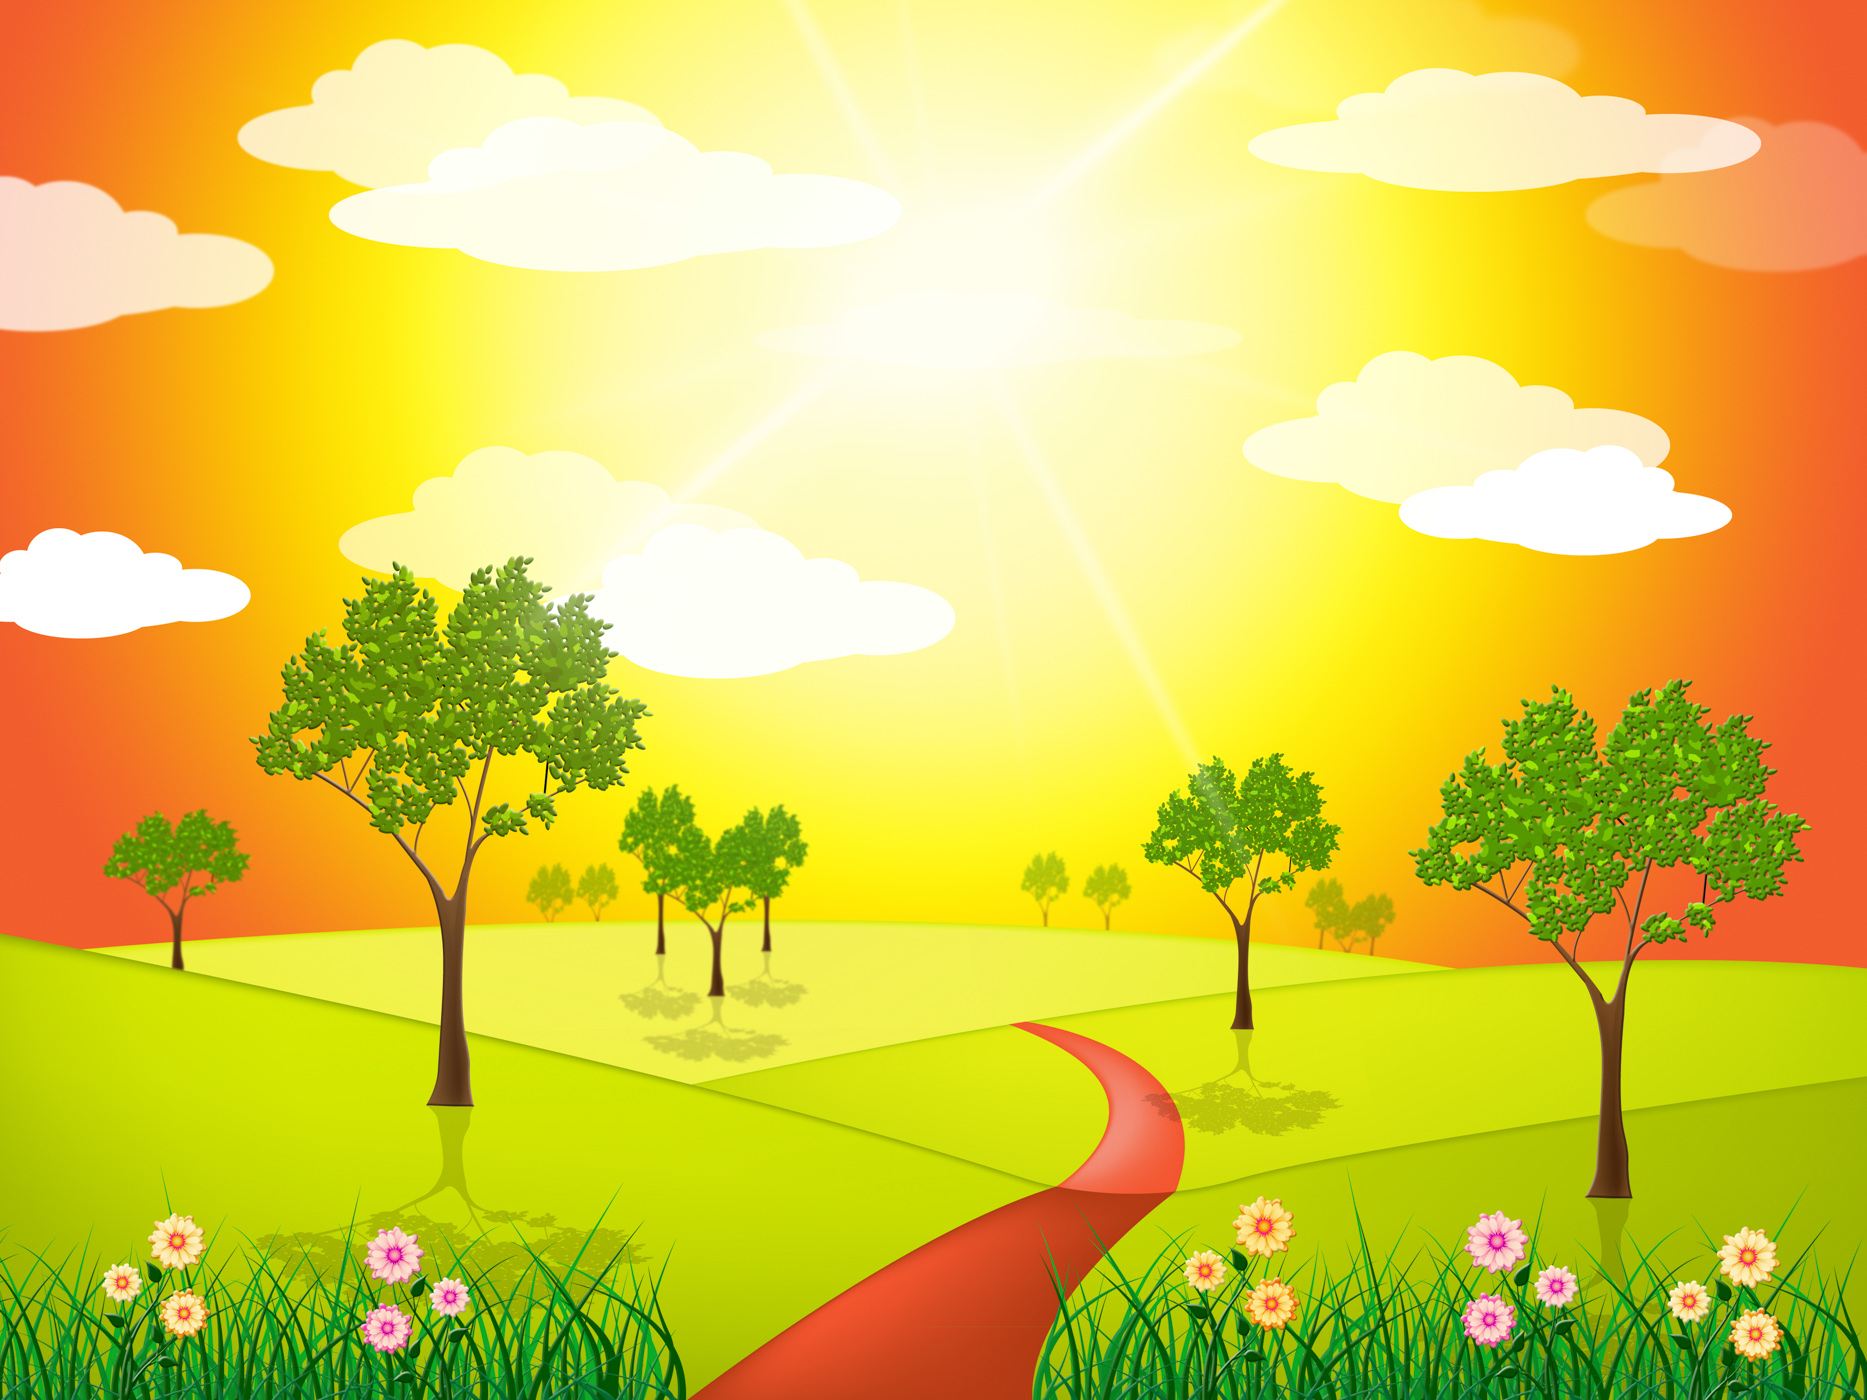 Grass countryside indicates solar scene and sunny photo